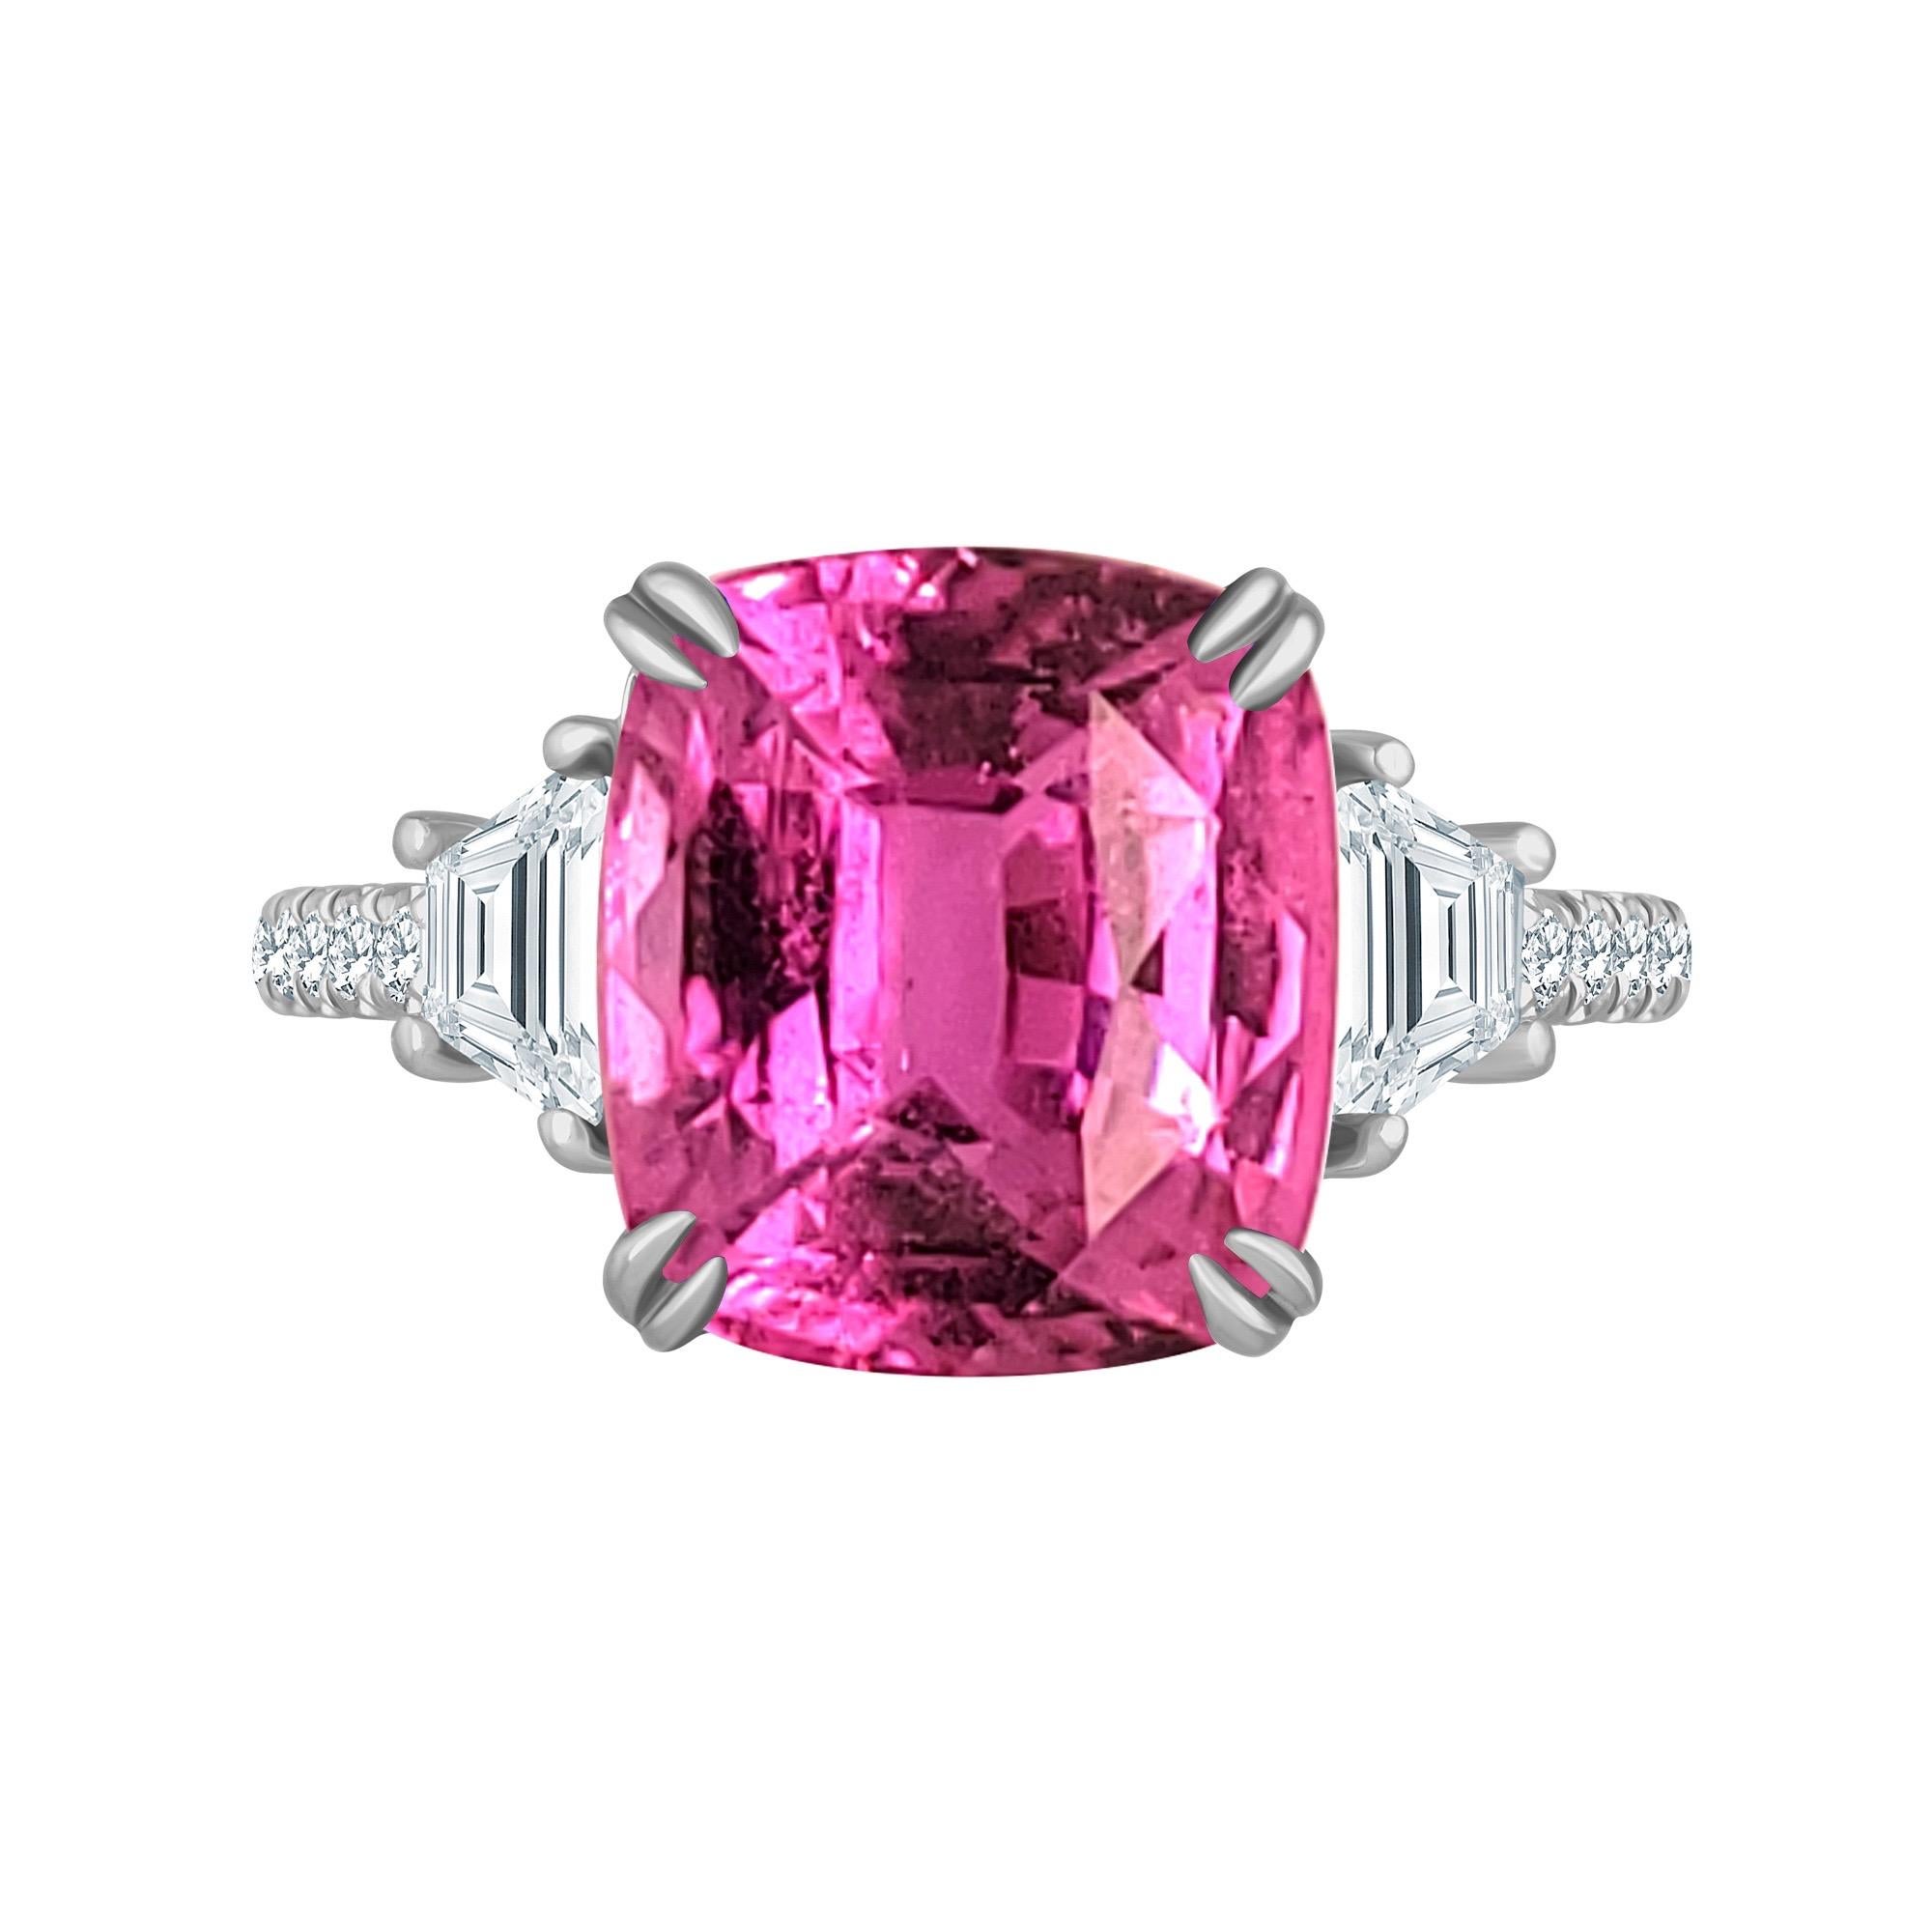 Emilio Jewelry Gia Certified 3.00 Carat Pink Sapphire Diamond Ring For Sale